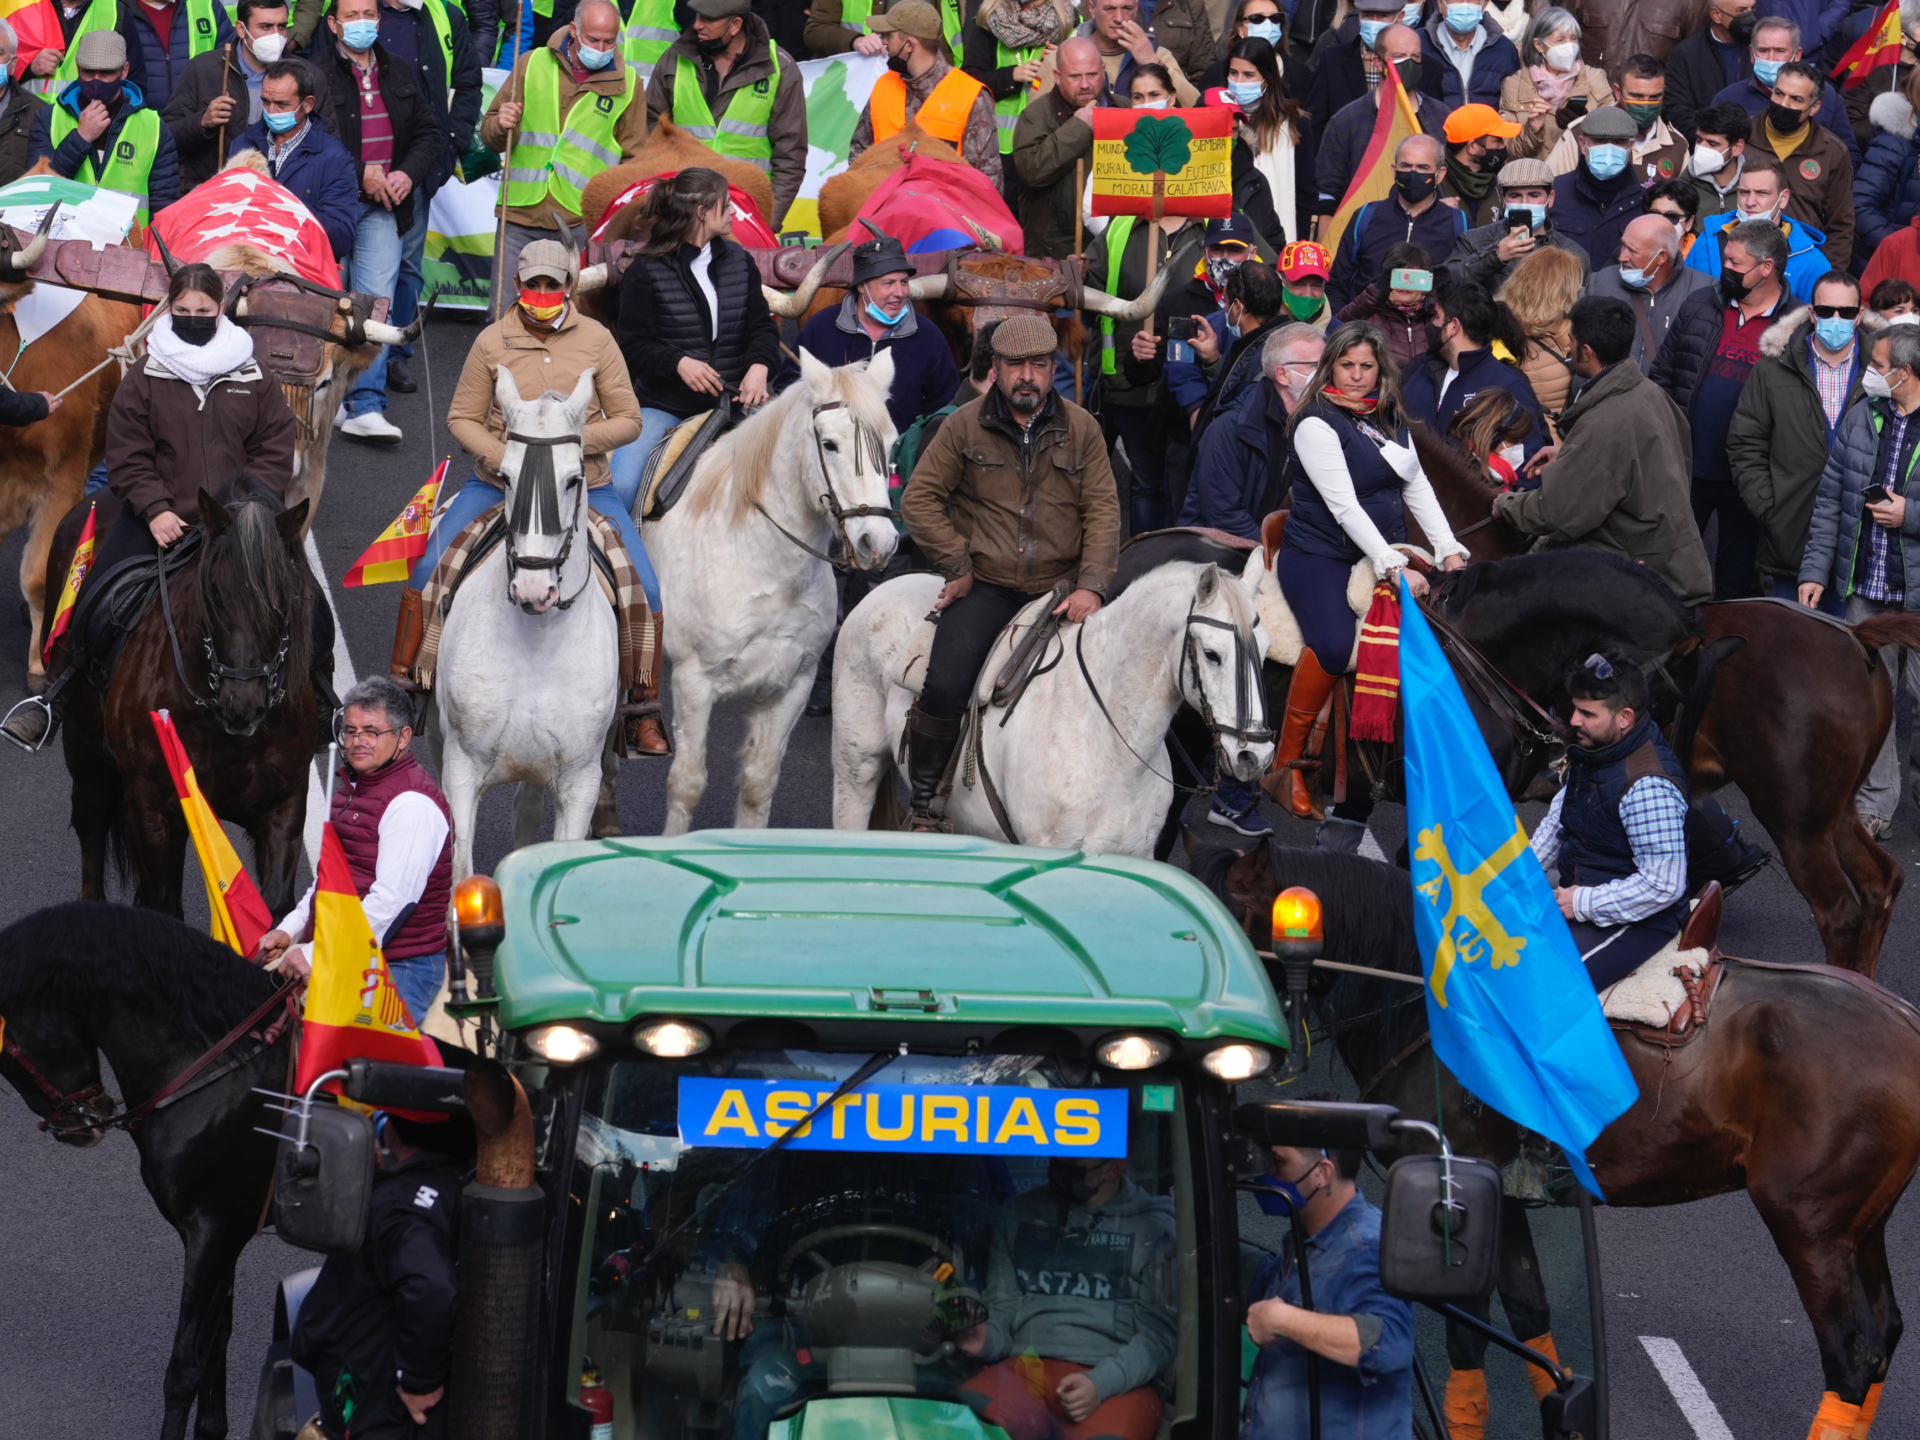 People on horseback follow a tractor during a march in defence of Spanish rural areas during a protest in Madrid, Spain, Sunday, Jan. 23, 2022. Members of rural community are demanding solutions by the government for problems and crisis in the Rural sector. (AP Photo/Paul White)